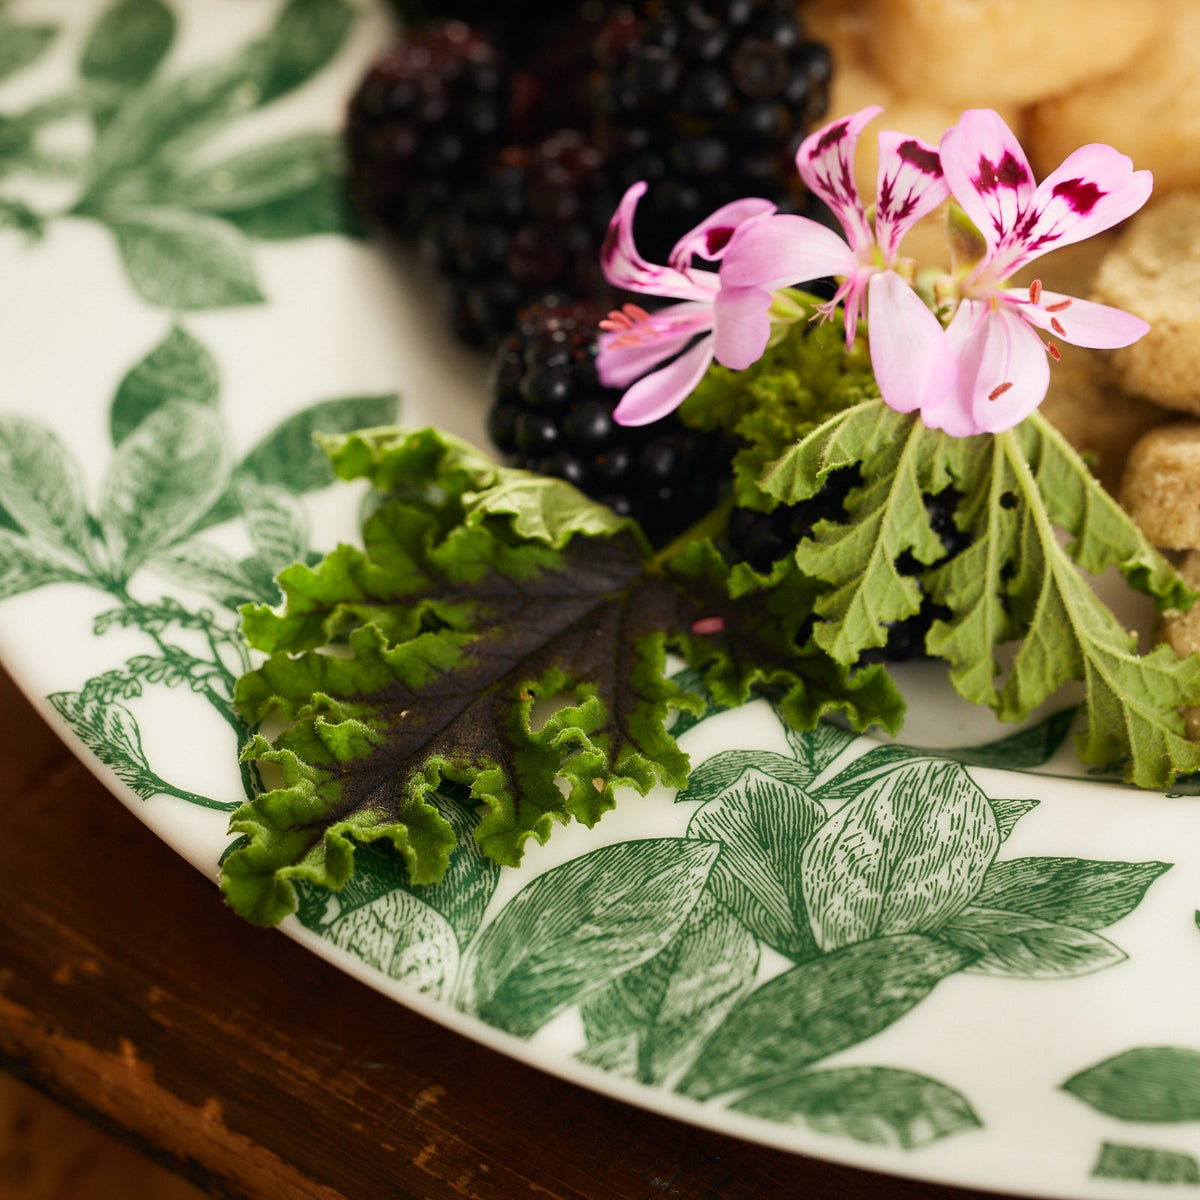 Close-up of a decorative Caskata Arbor Green Rimmed Dinner Plate made of premium porcelain, featuring botanical details with green leafy designs. It holds a small arrangement of fresh blackberries, a pink flower, and leafy greens.